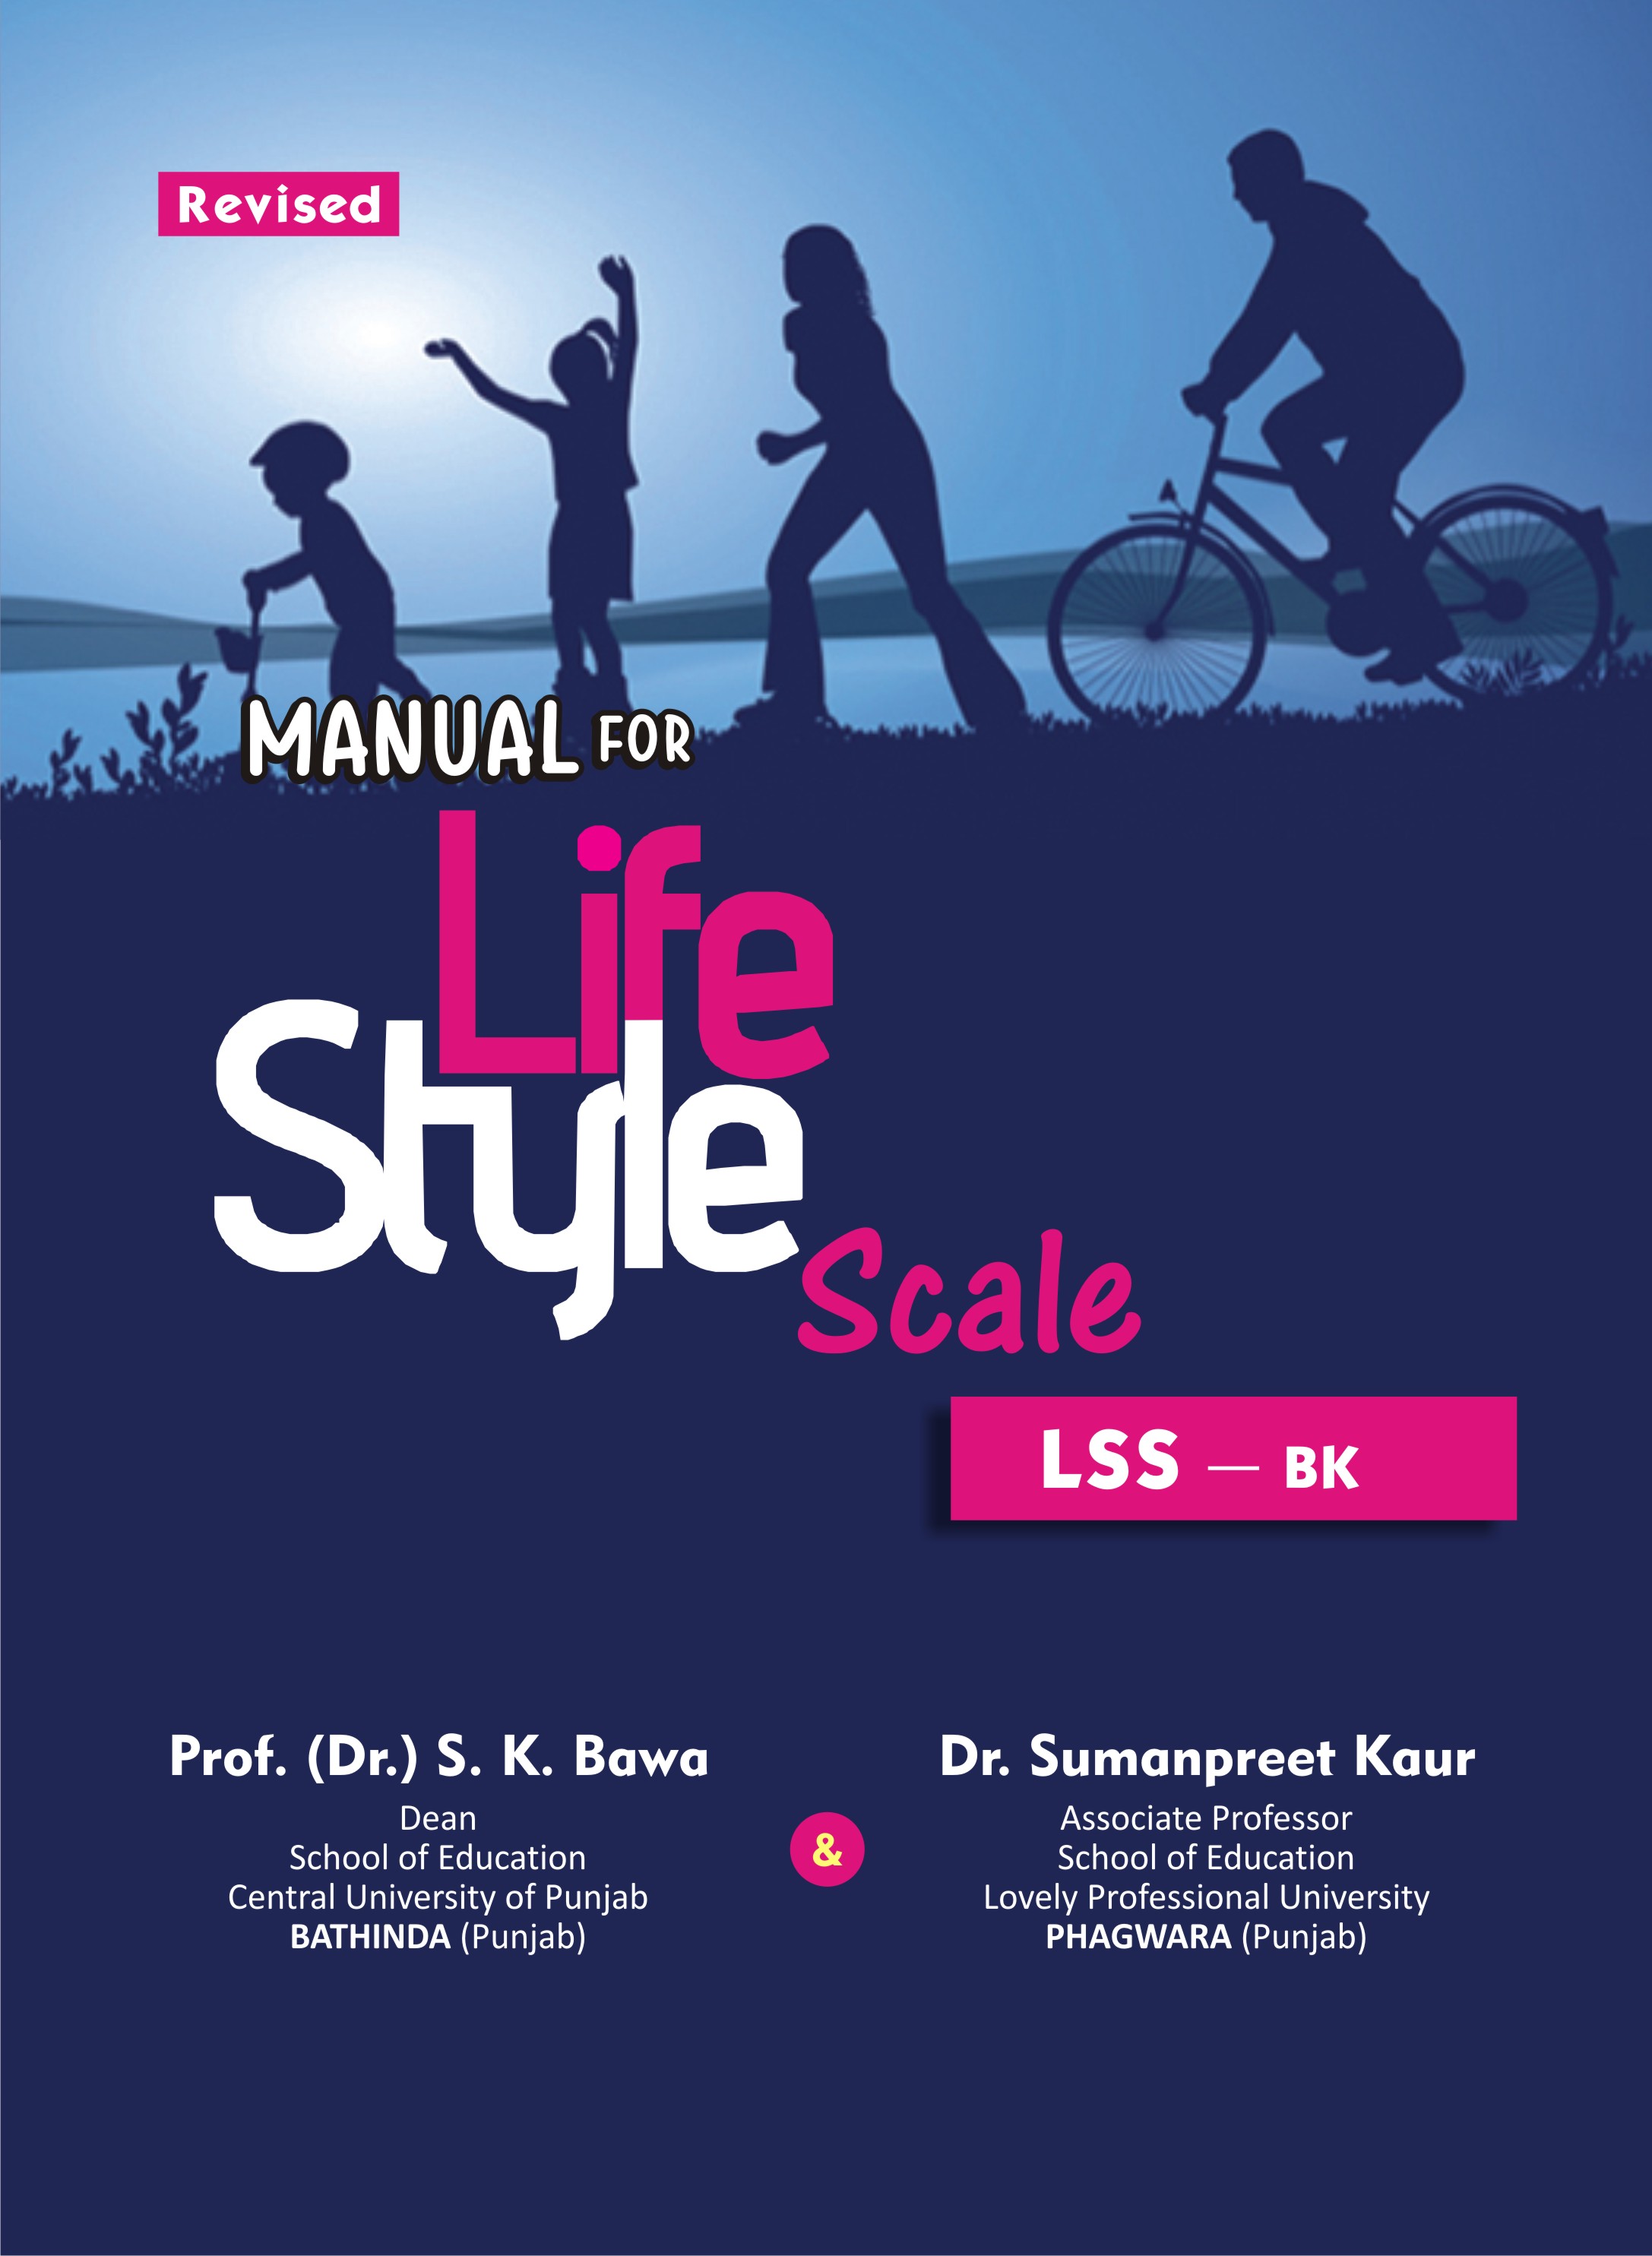 LIFE-STYLE-SCALE